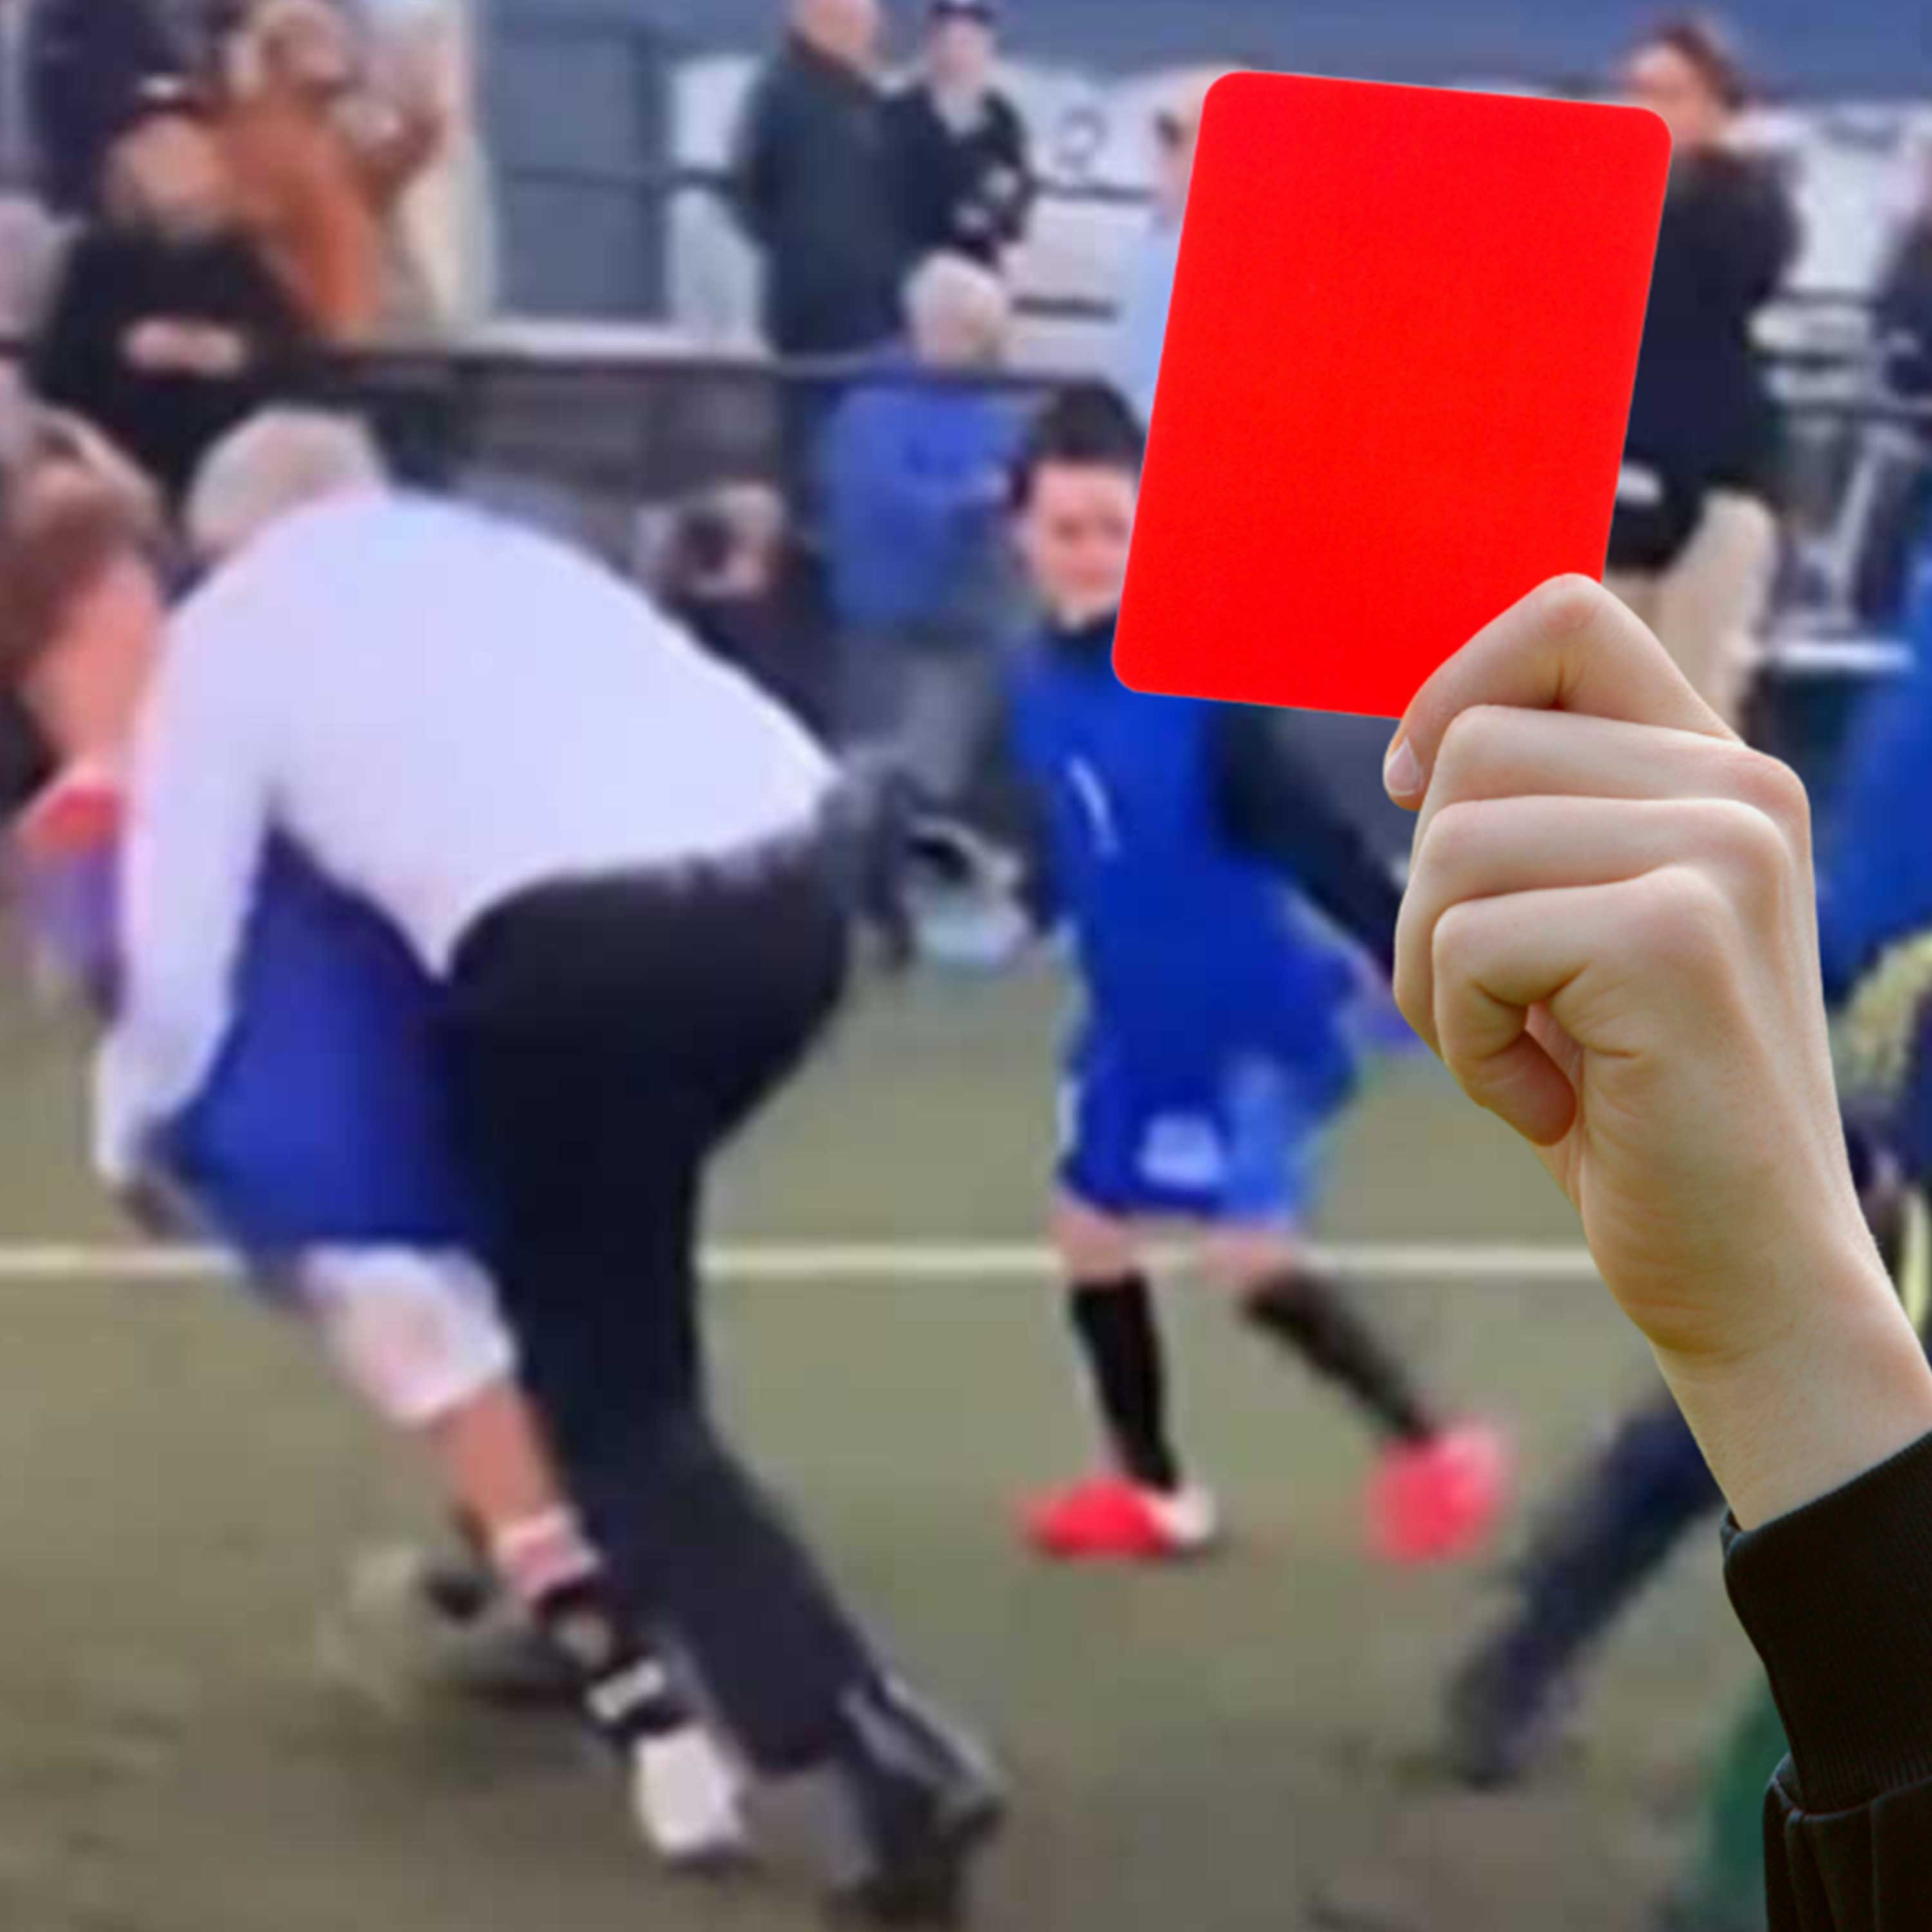 3AW Breakfast sends Scott Morrison's tackle to the footy tribunal!